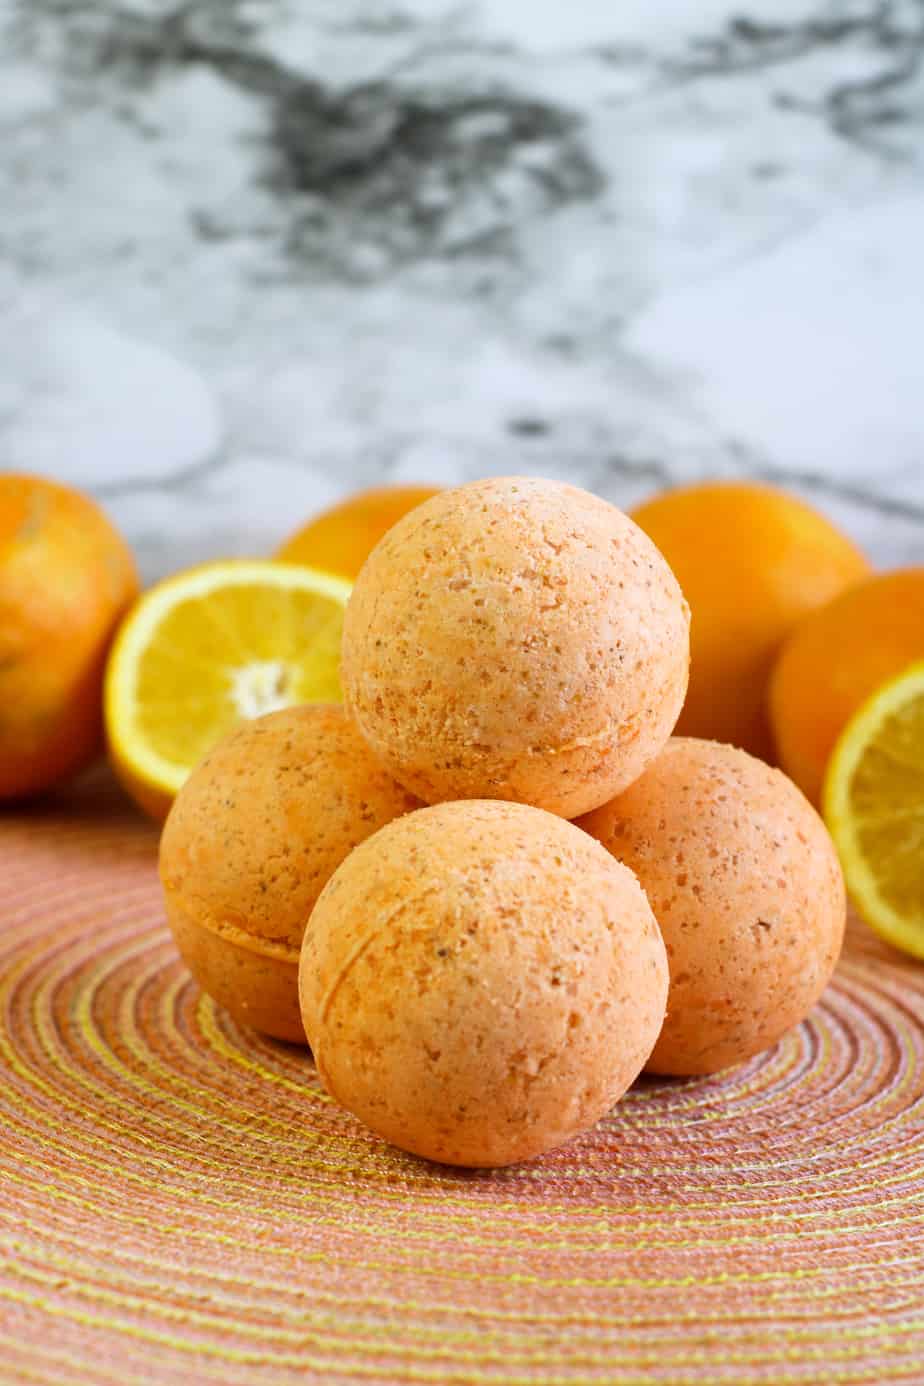 Homemade Bath Bombs & More: Soothing Spa Treatments for Luxurious